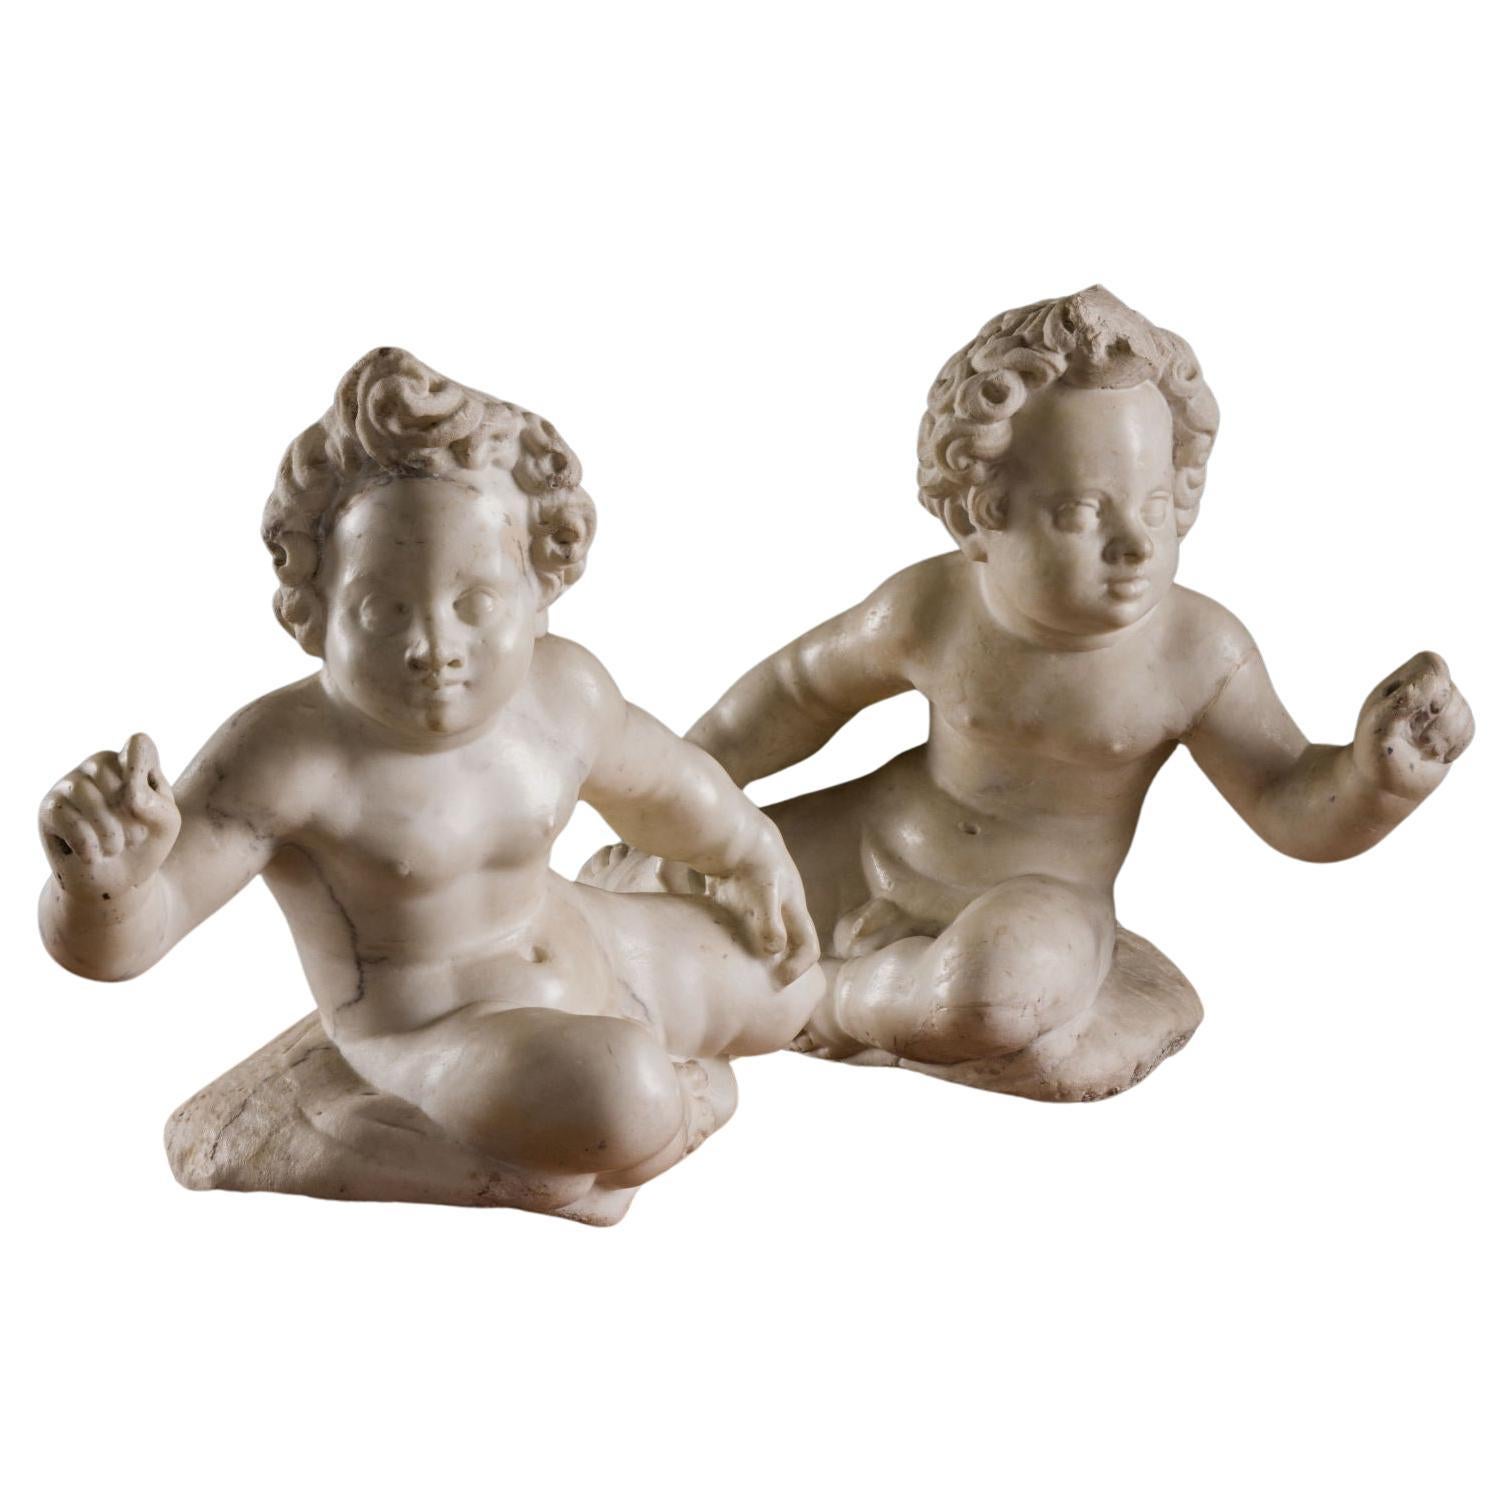 Two Putti, c. 1640-1650. Giovanni Pietro and Carlo Carra (workshop of) For Sale